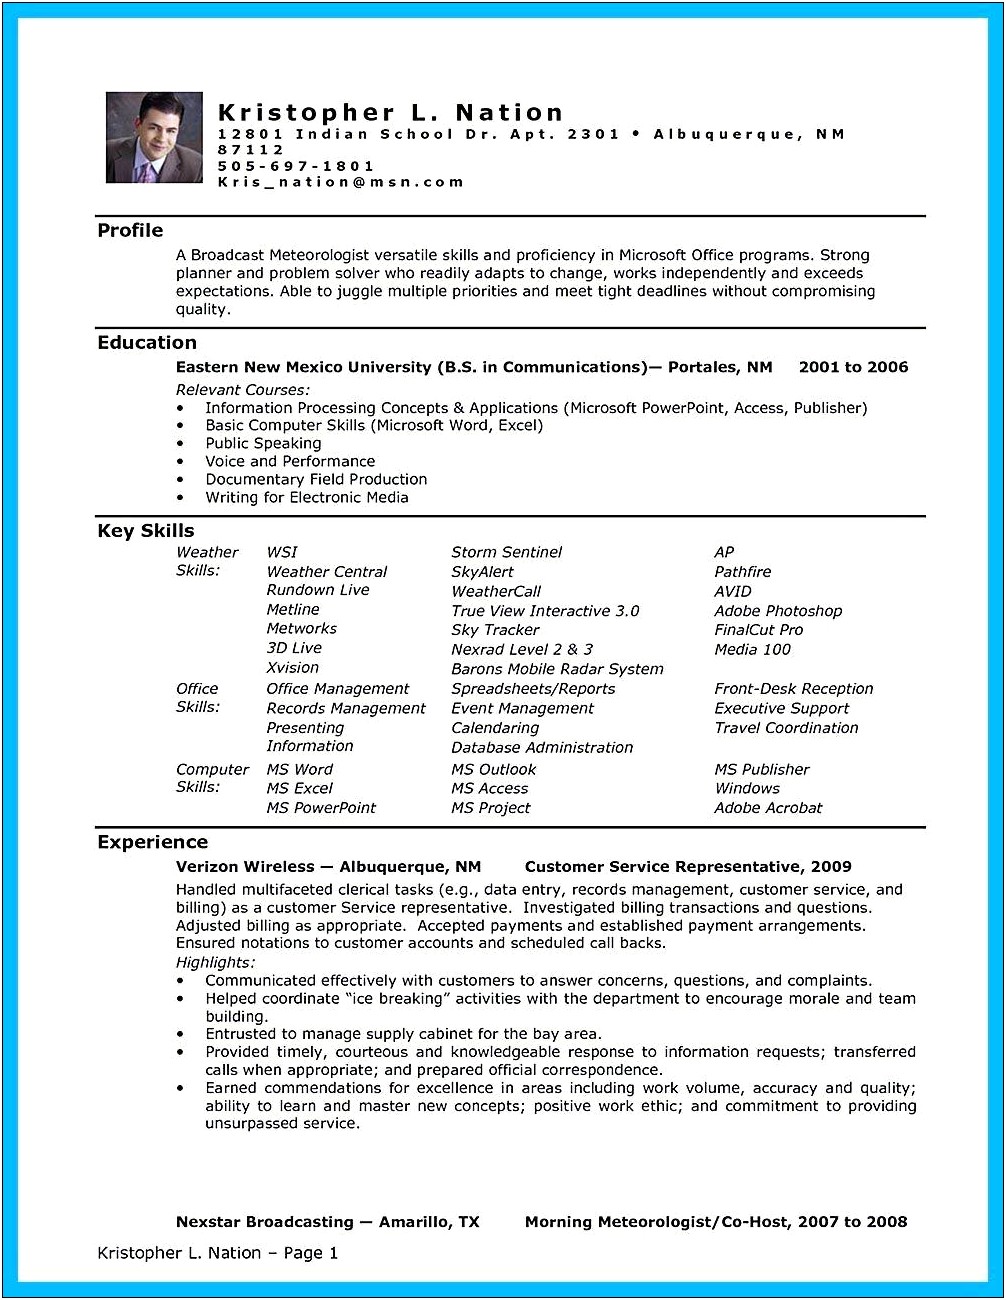 Resume Samples For Entry Level Administrative Assistant